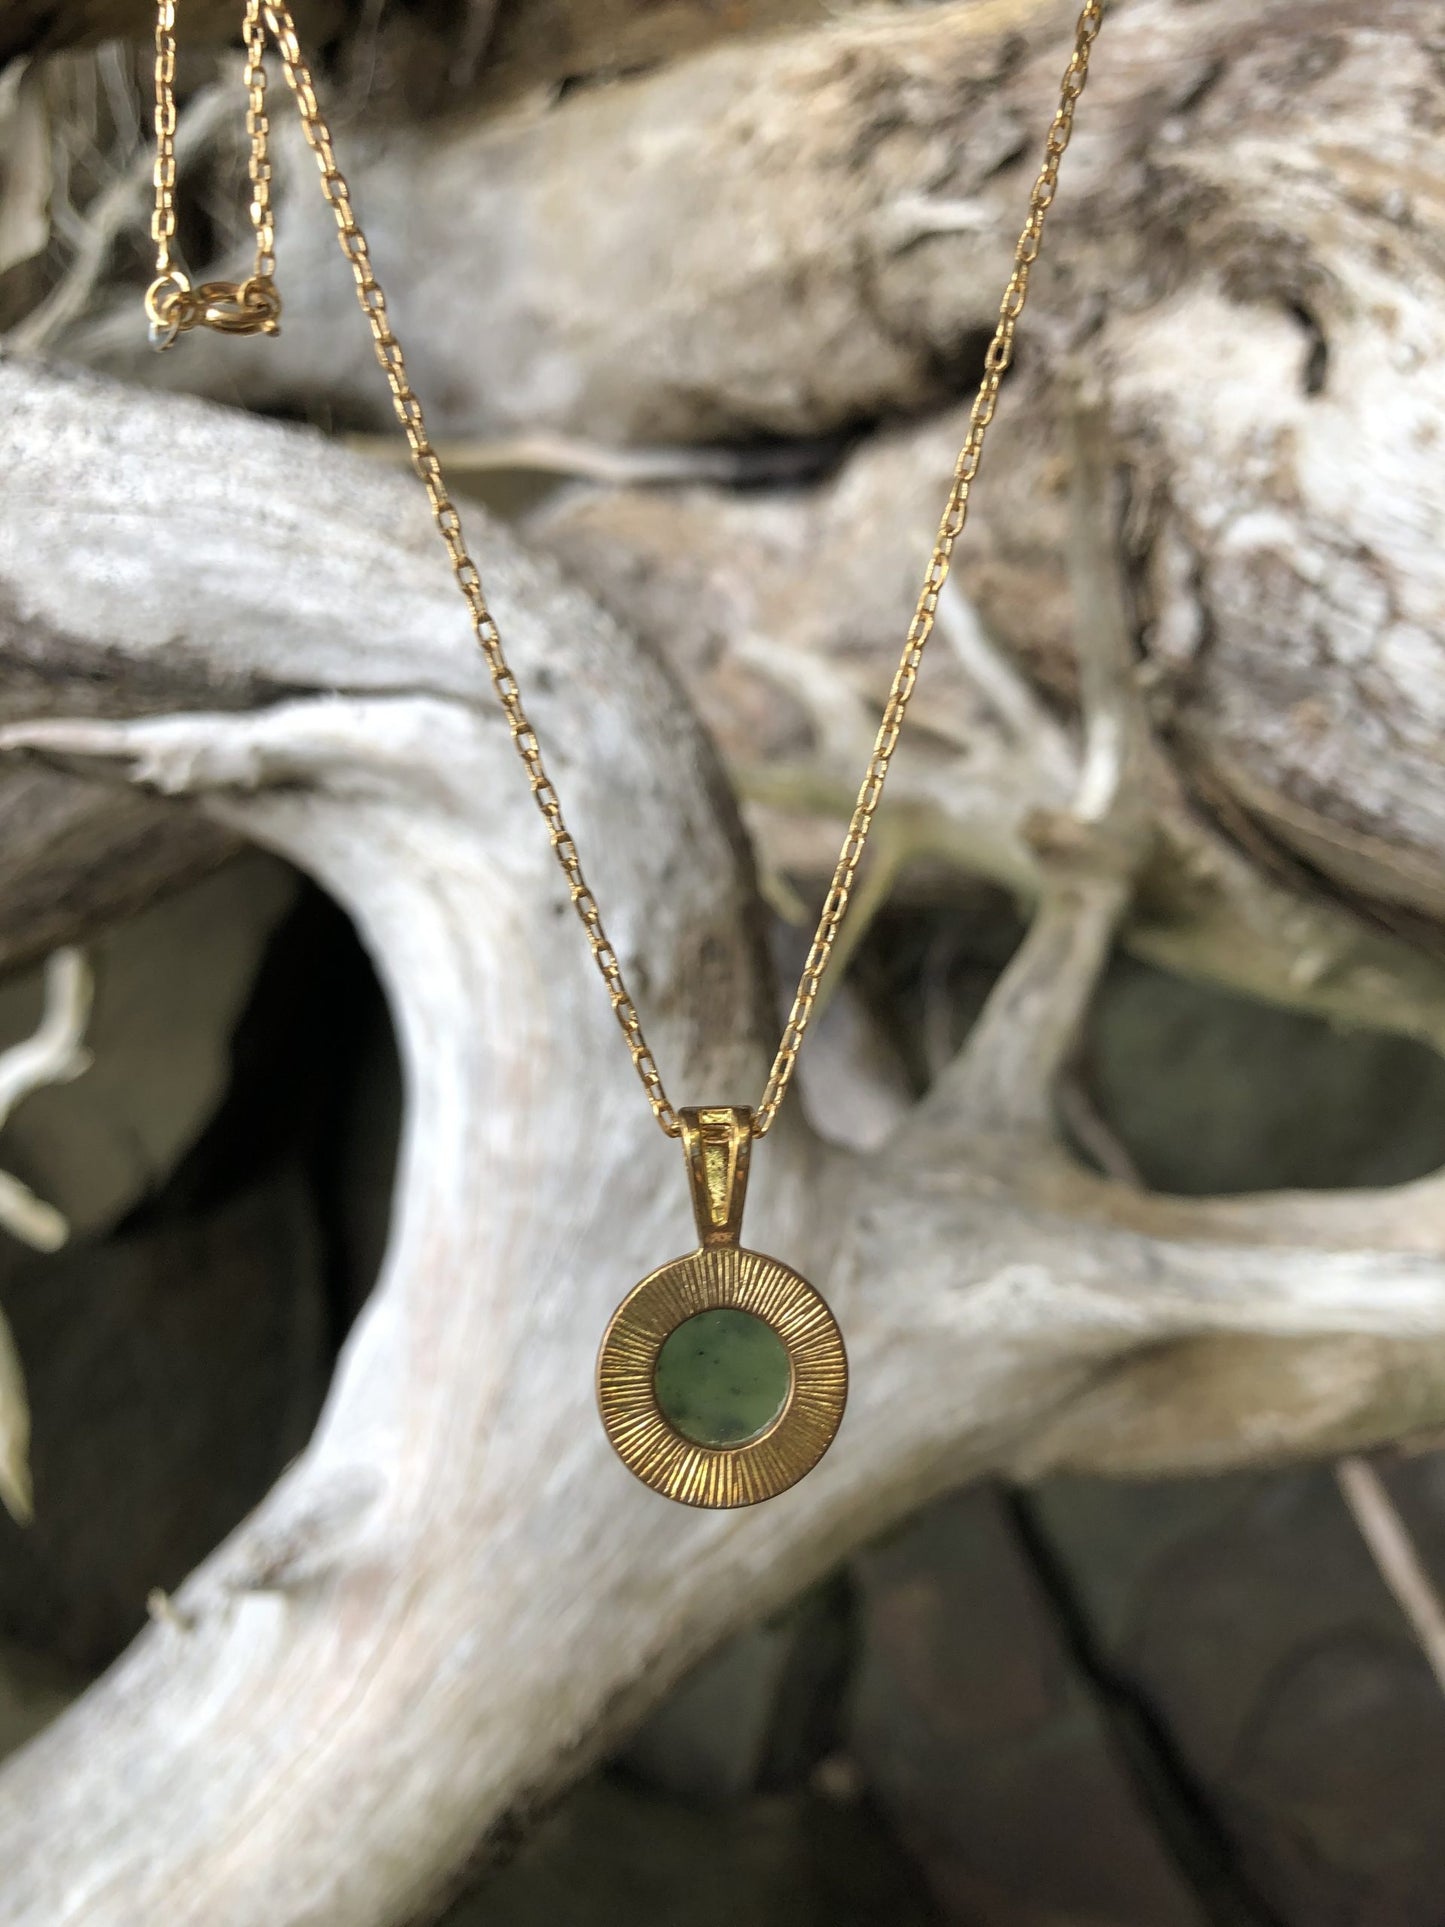 Necklace with natural Russian Nephrite Jade, bright green with black spots, hand polished to a 12mm round cabochon and set in a gold plated setting with 19 inch chain, back